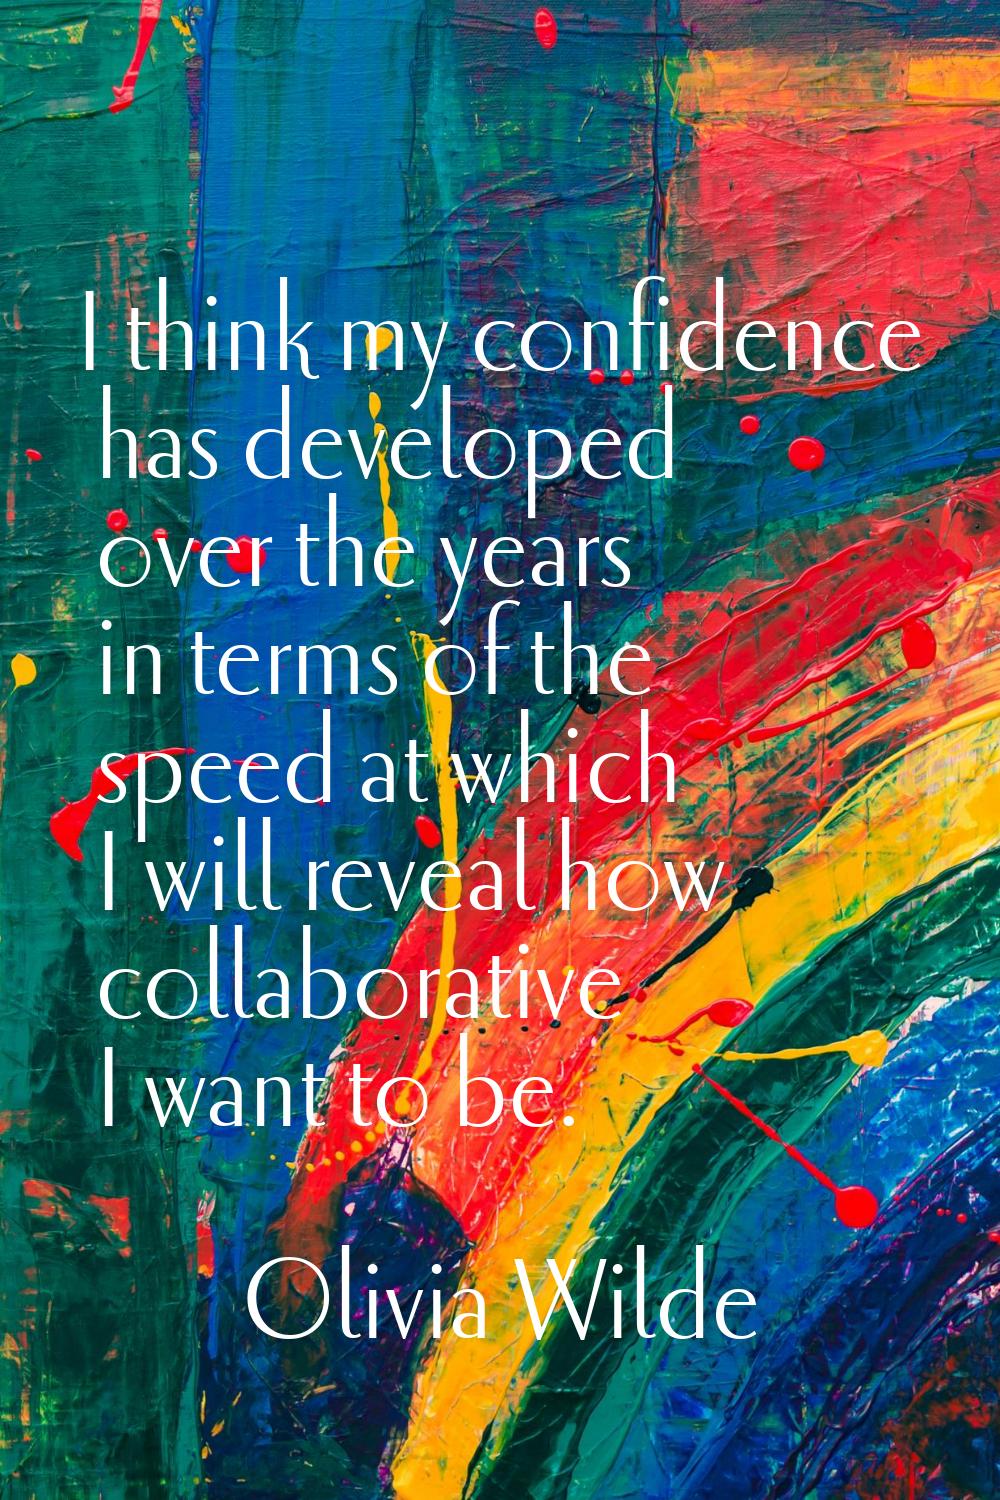 I think my confidence has developed over the years in terms of the speed at which I will reveal how